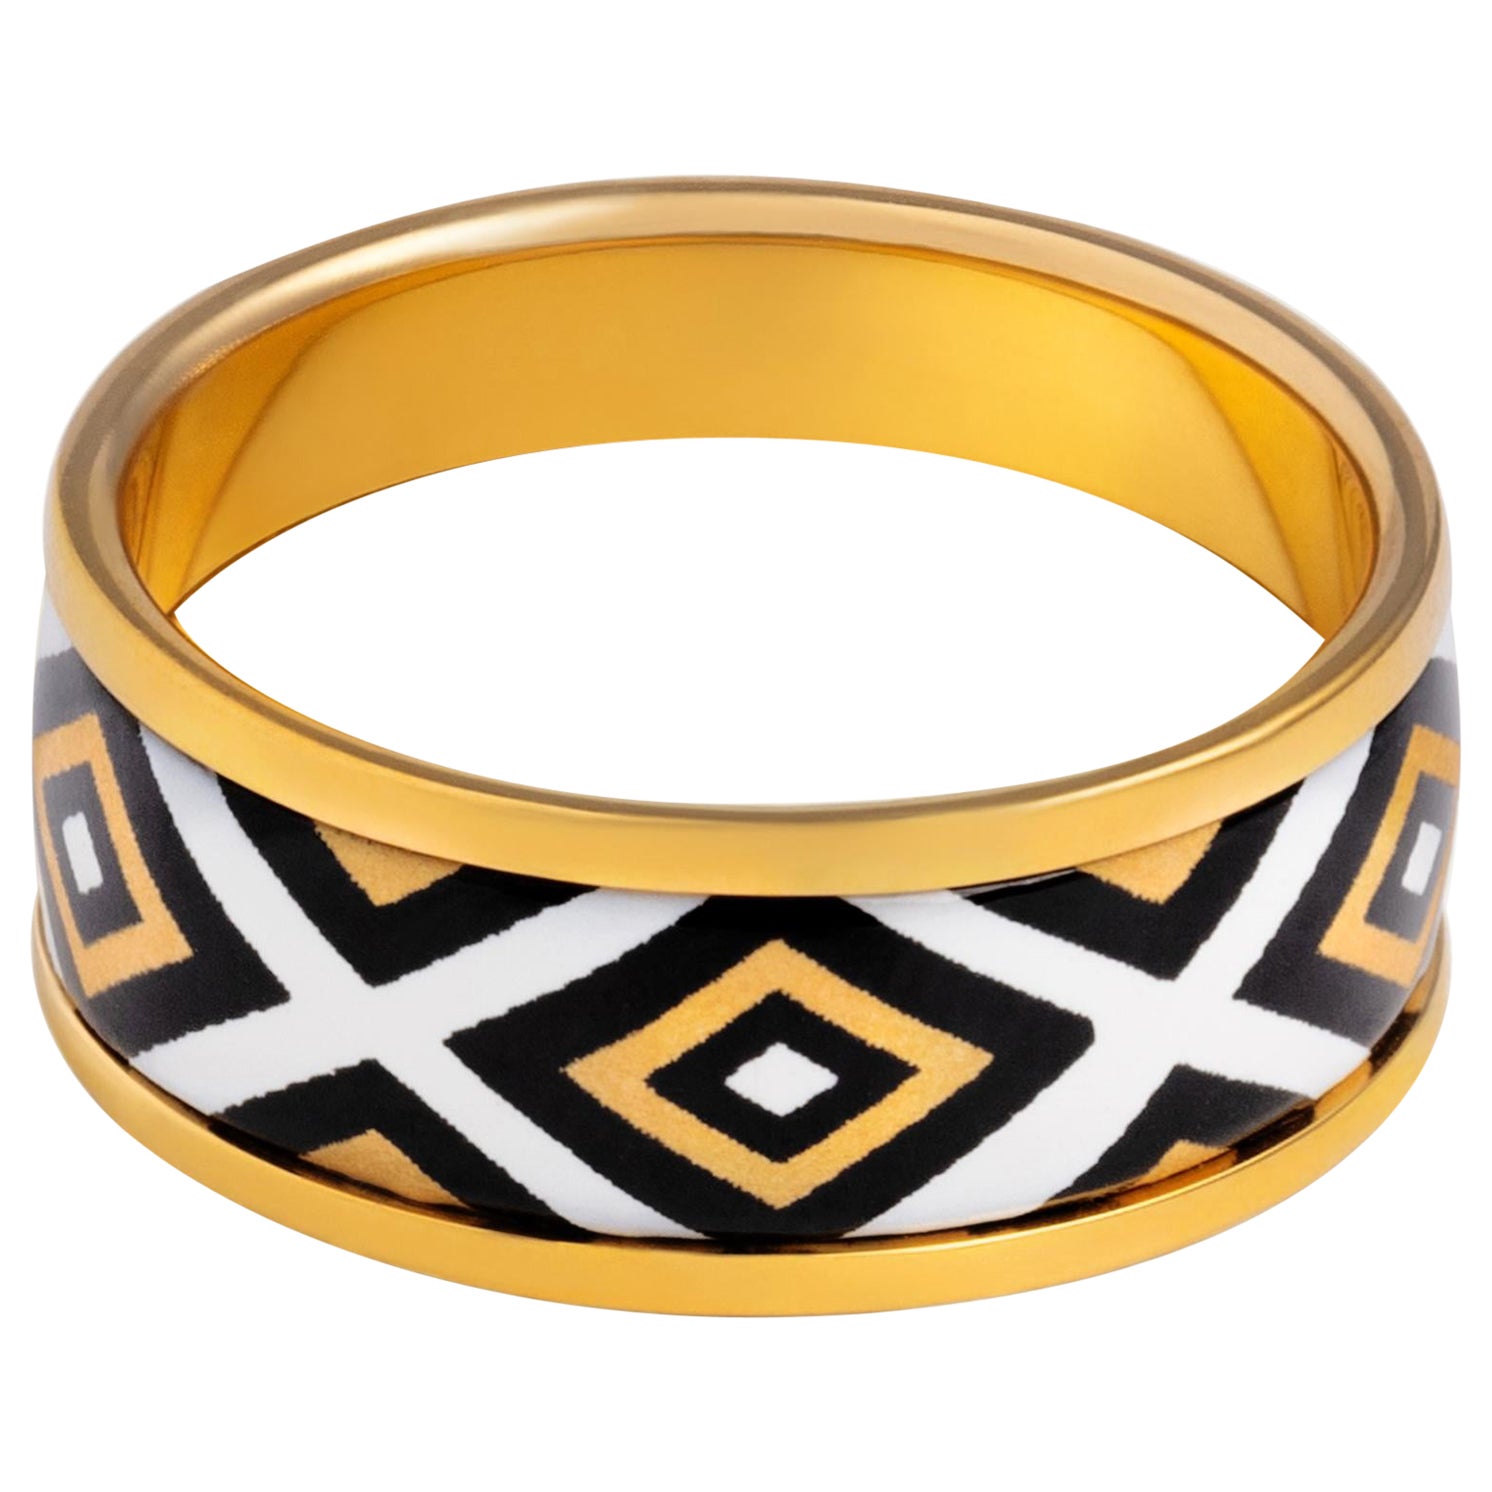 For Sale:  Hand-Painted Gold-Plated Stainless Steel Band Ring with Fire Enamel Detail